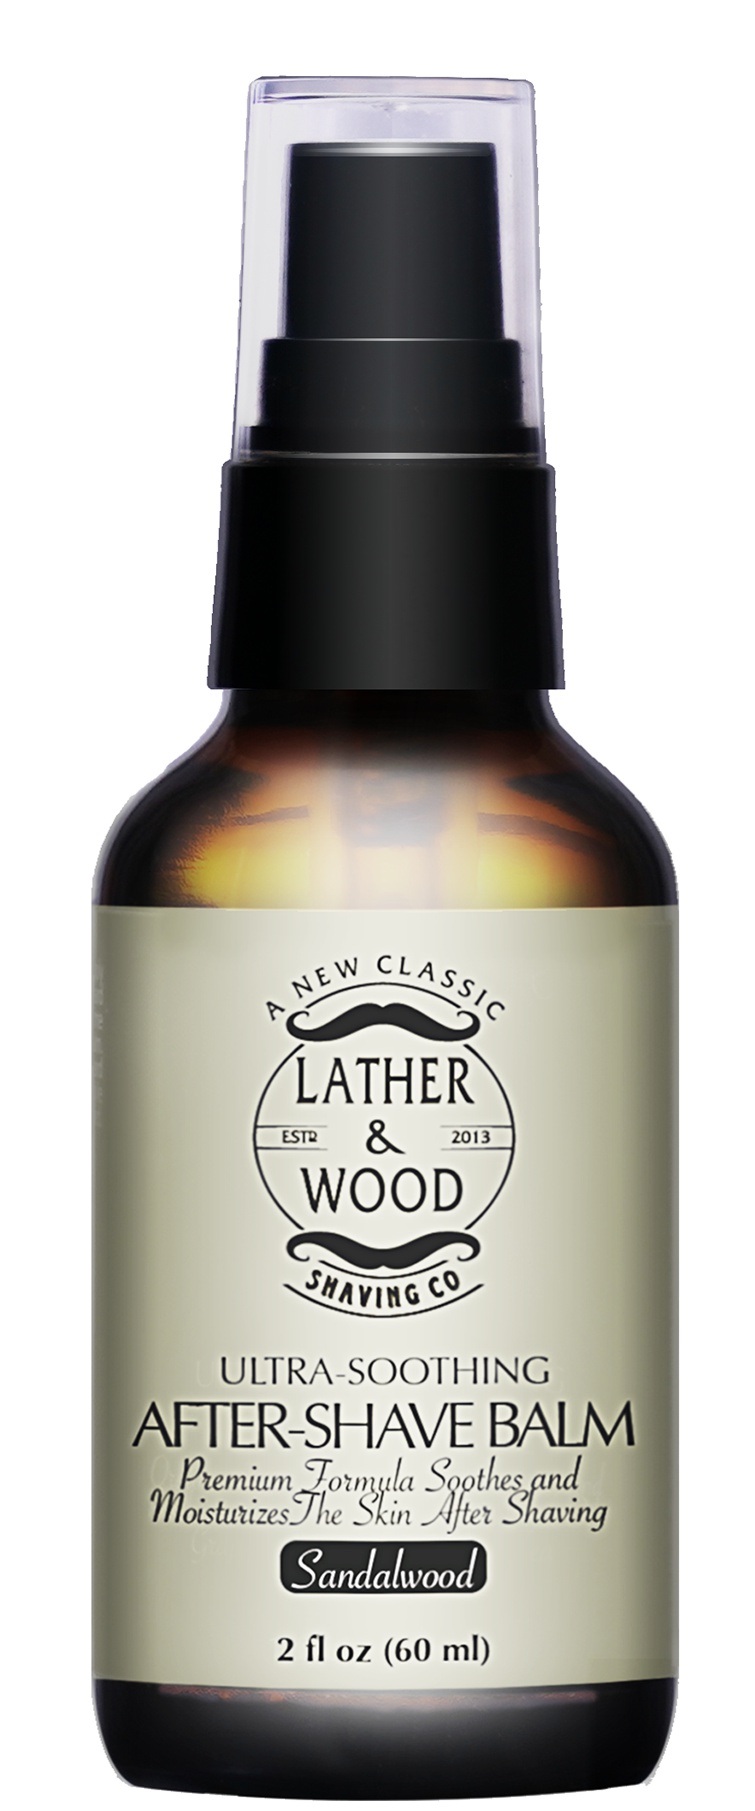 Lather & Wood Ultra-soothing After-shave Balm